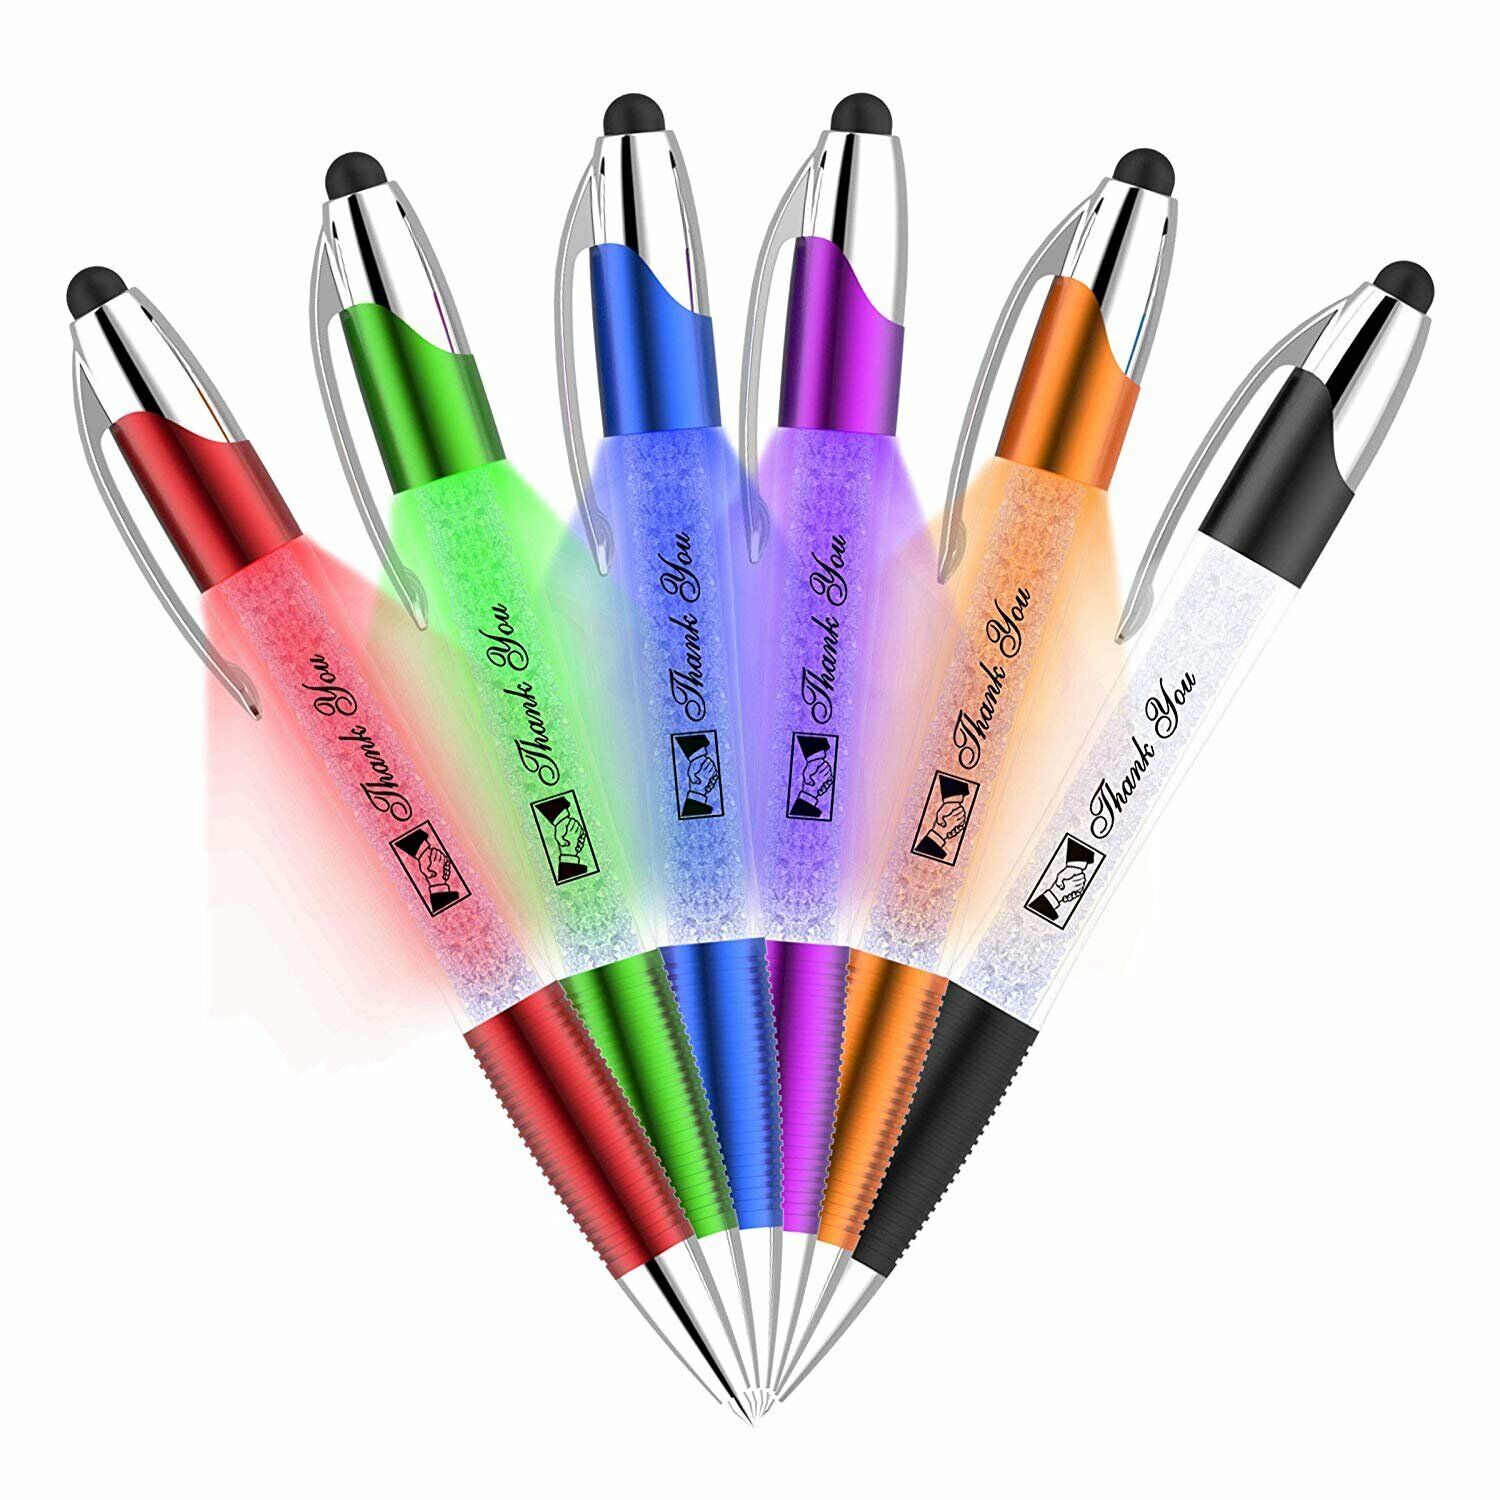 Thank You Greeting Gift Stylus Pens-Pen Lights up a Thank You Message- 6 Pack